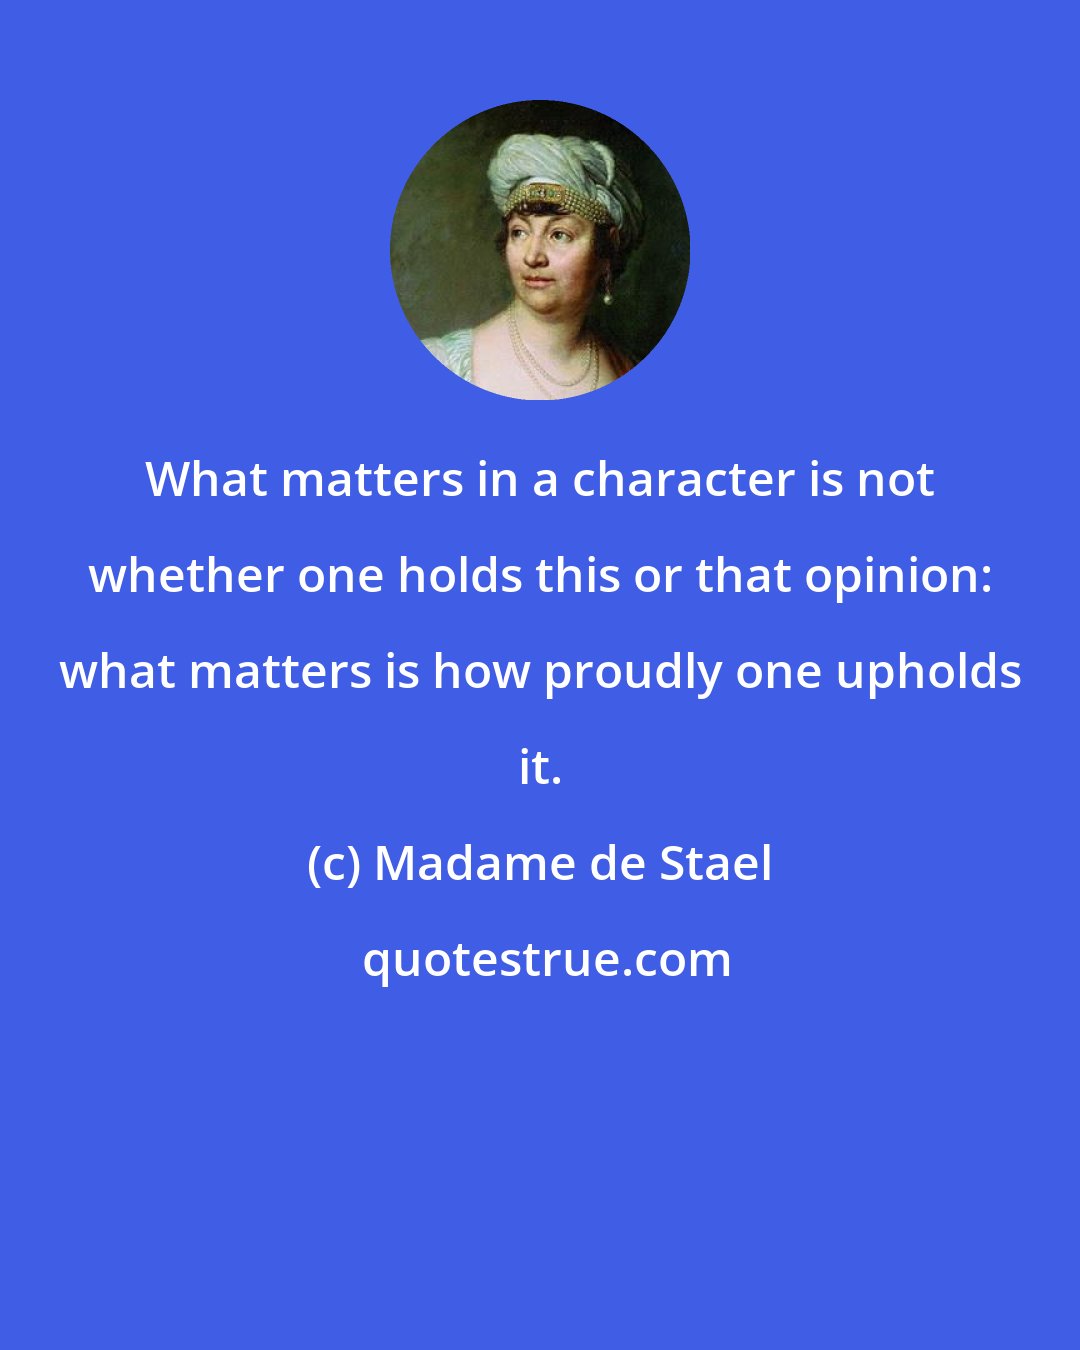 Madame de Stael: What matters in a character is not whether one holds this or that opinion: what matters is how proudly one upholds it.